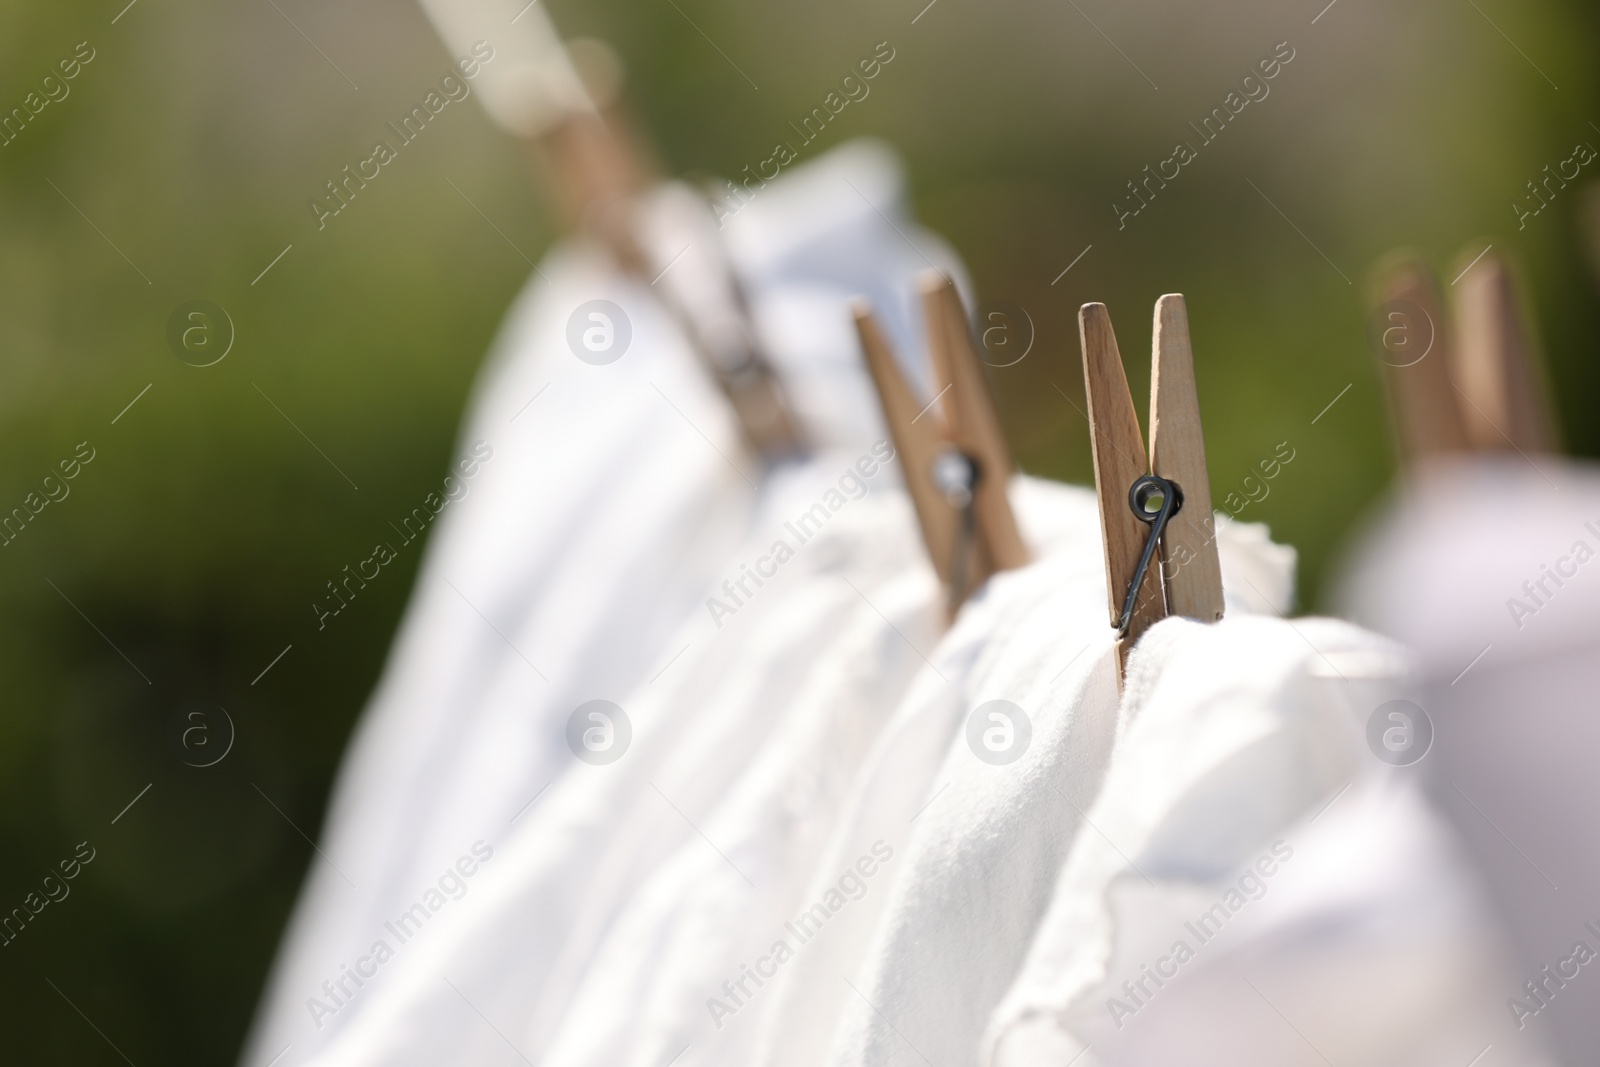 Photo of Clean clothes drying outdoors, closeup. Focus on clothespin